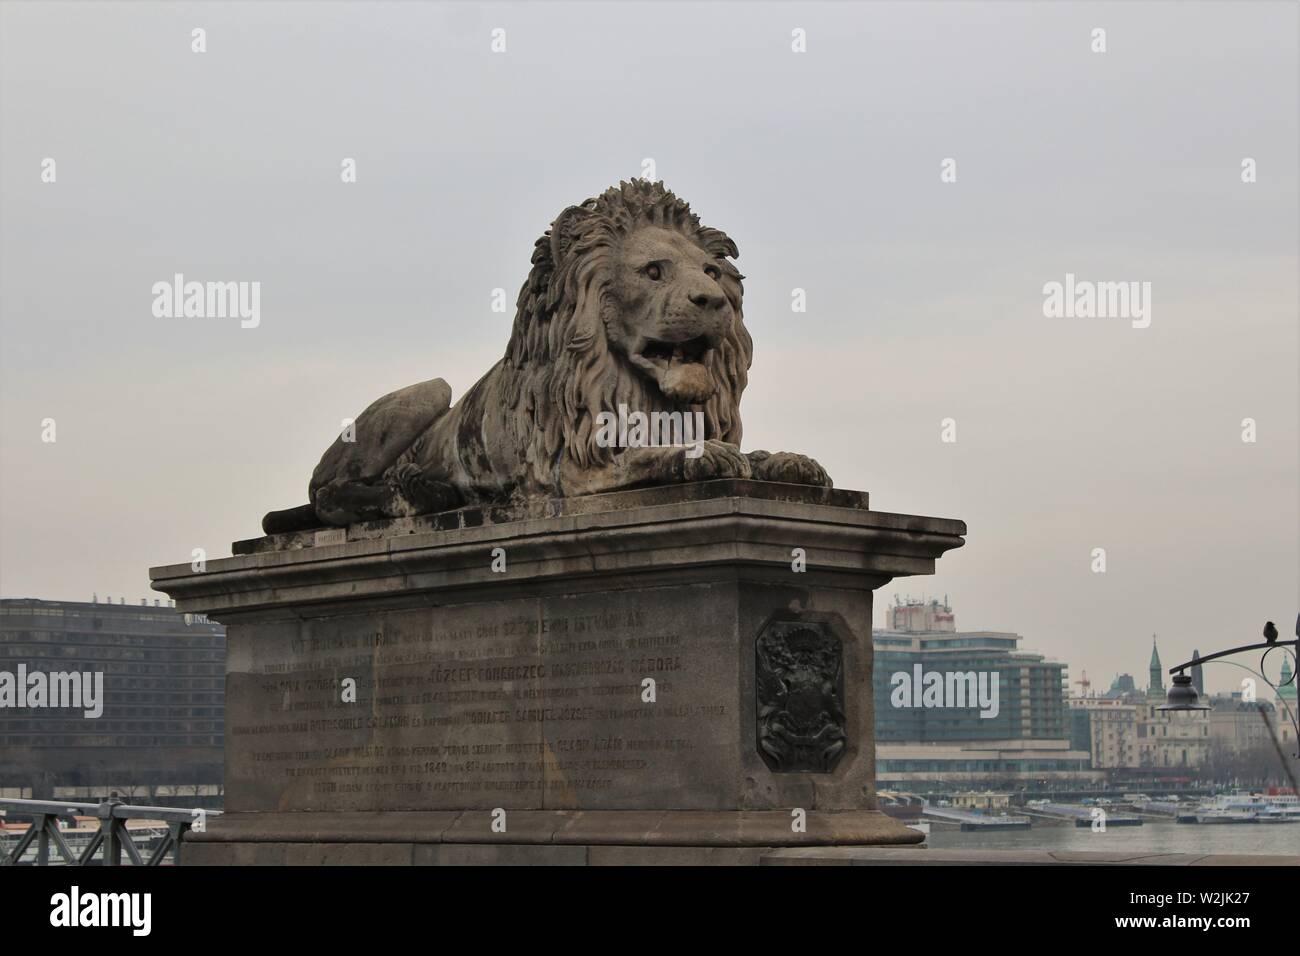 One of the lion sculptures on the Buda side of the Széchenyi chain bridge in Budapest. The view looks across the river Danube to the Pest side. Stock Photo